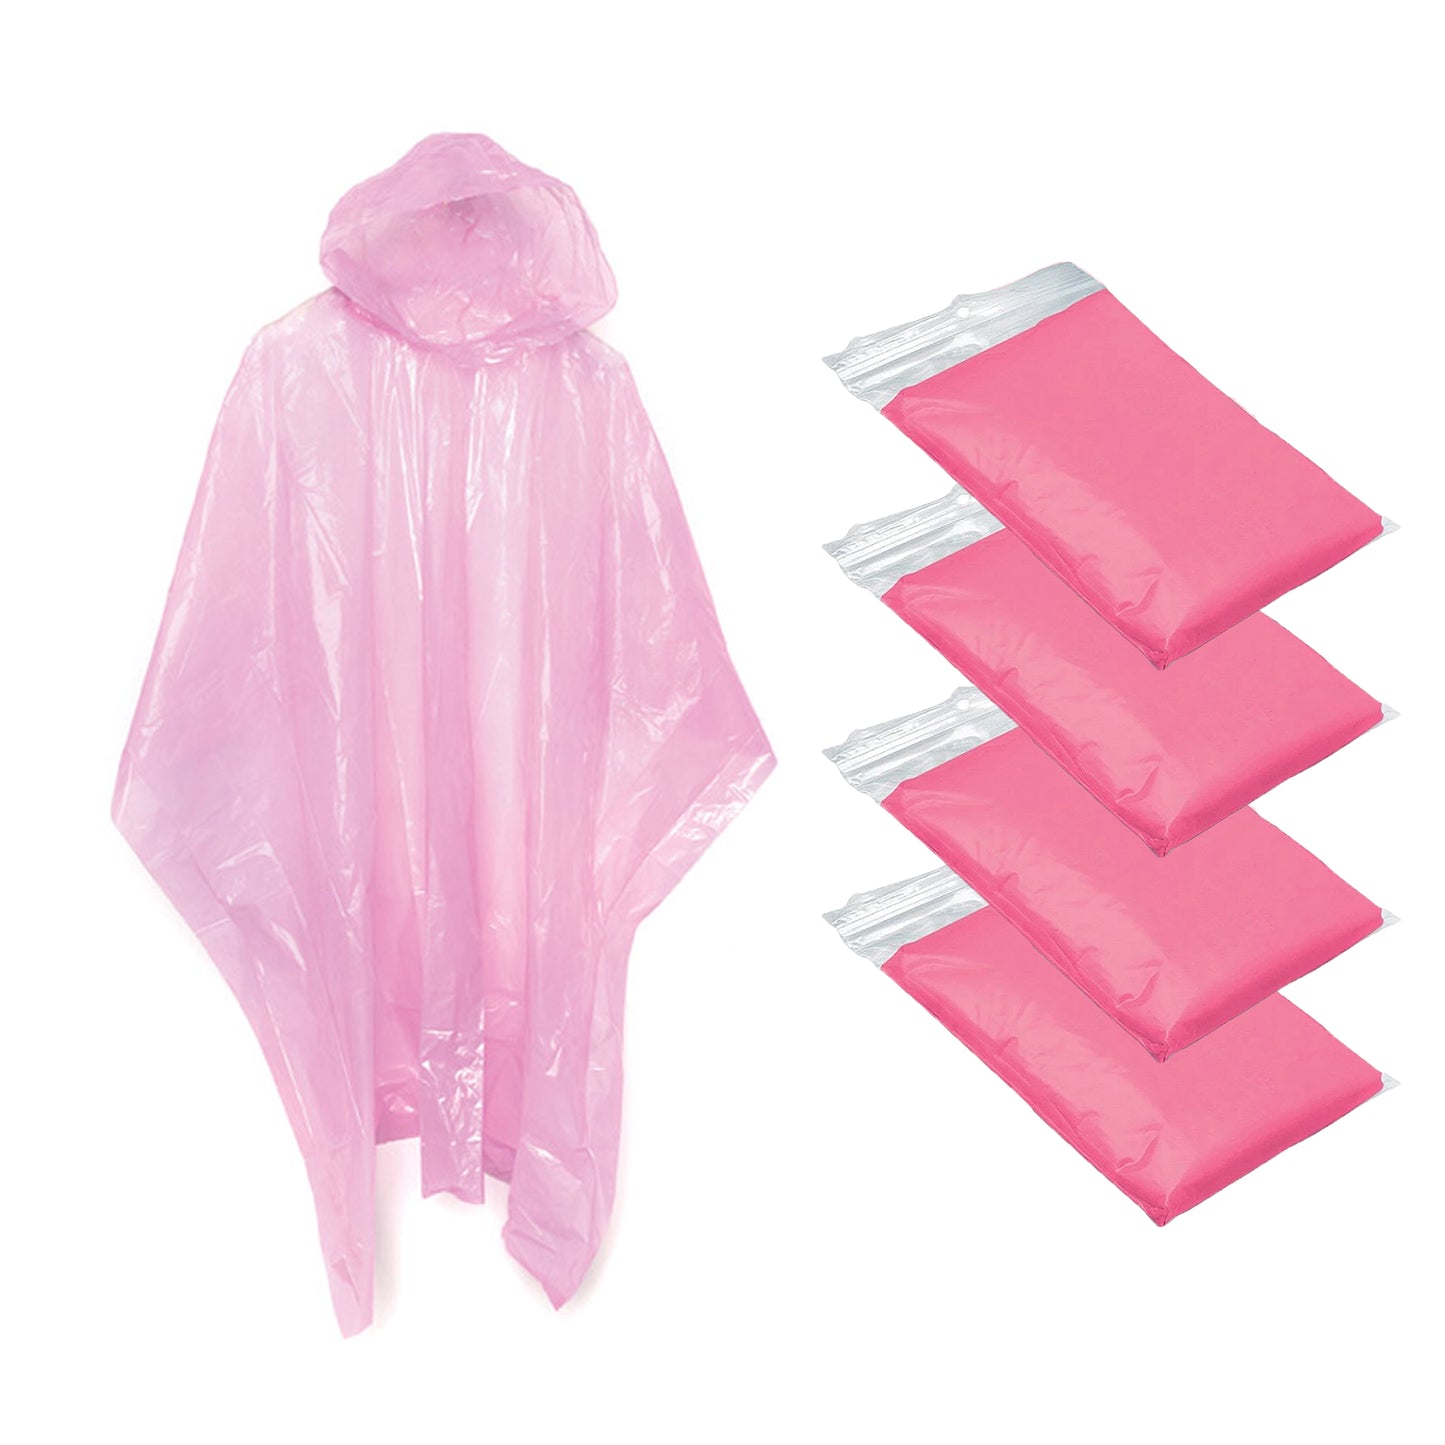 4x Pink Adult Waterproof Hooded Rain Poncho Mac Coat For Festivals & Theme Parks